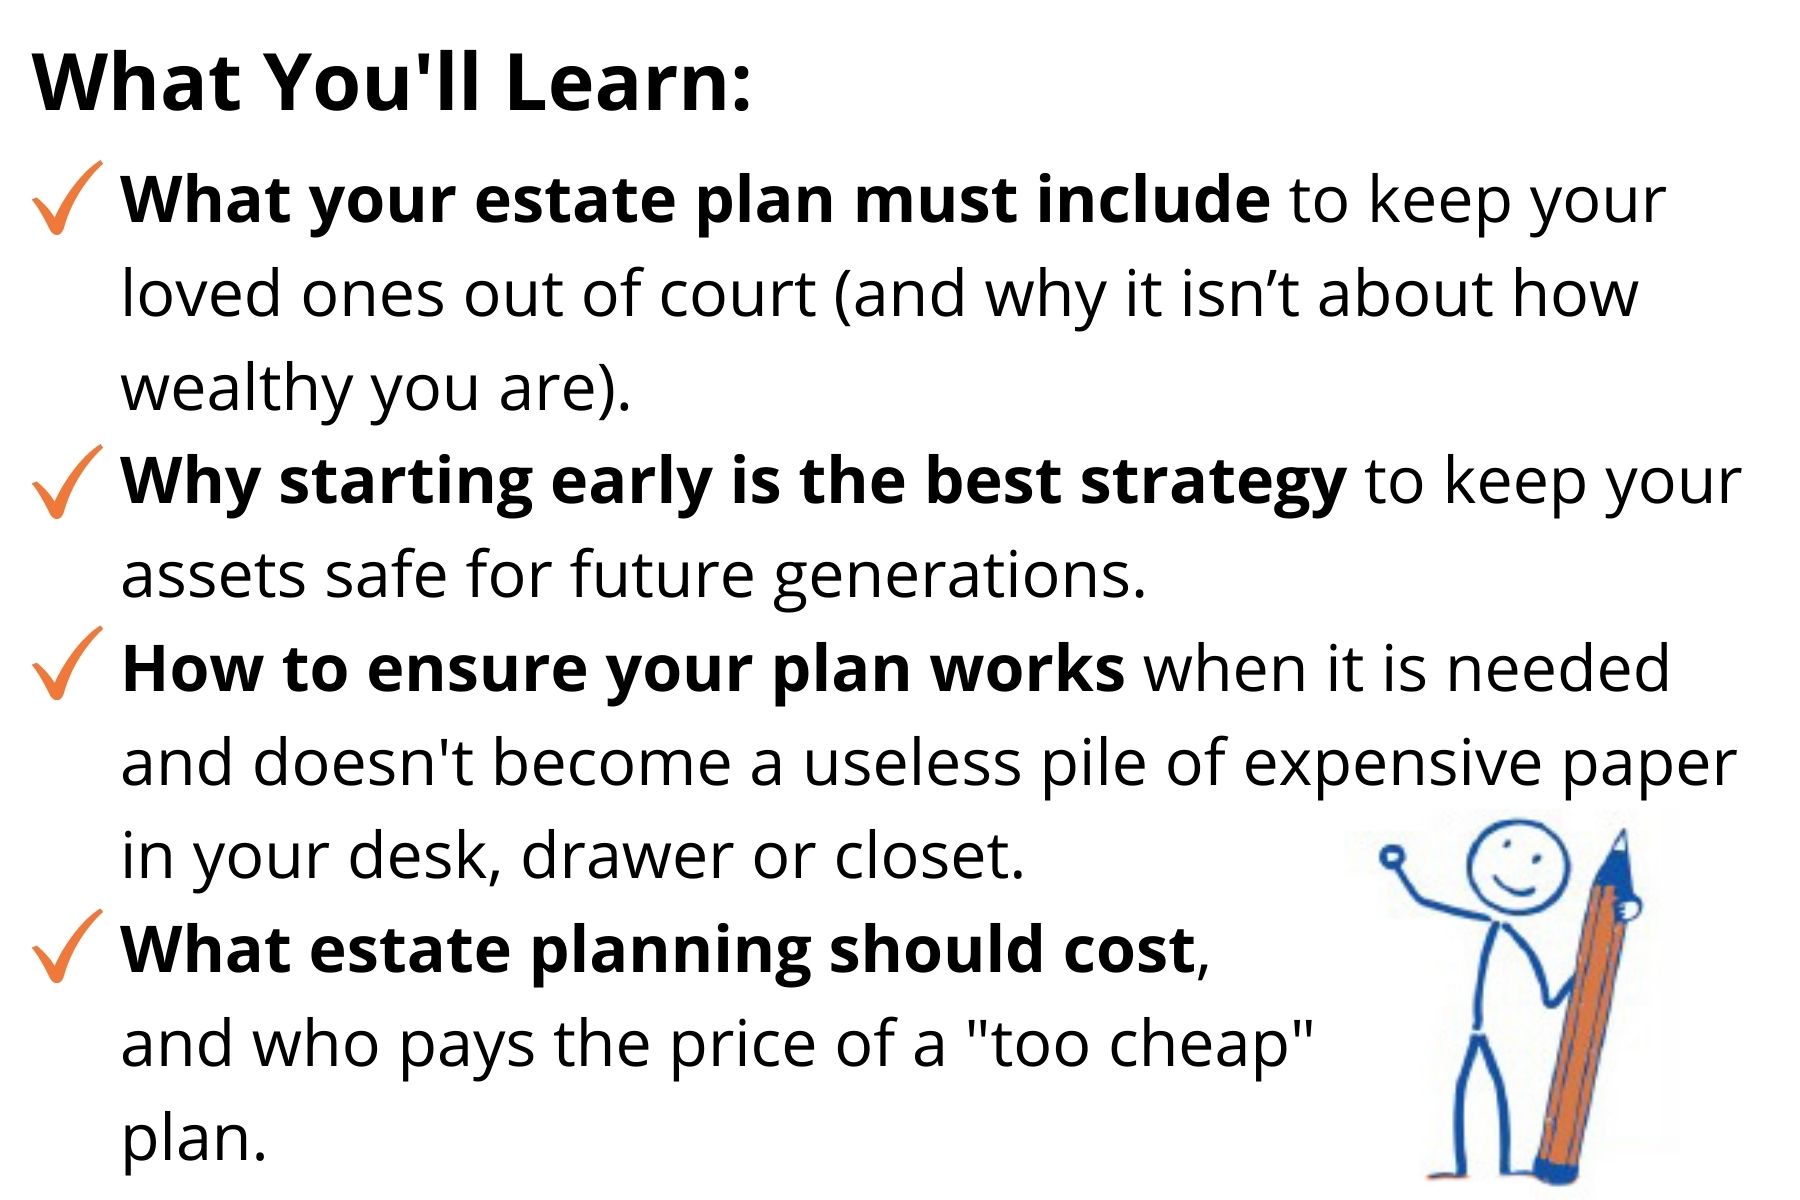 What You'll Learn: 1) What estate planning is 2) How to steer clear of unexpected legal pitfalls 3) Why starting early is the best strategy